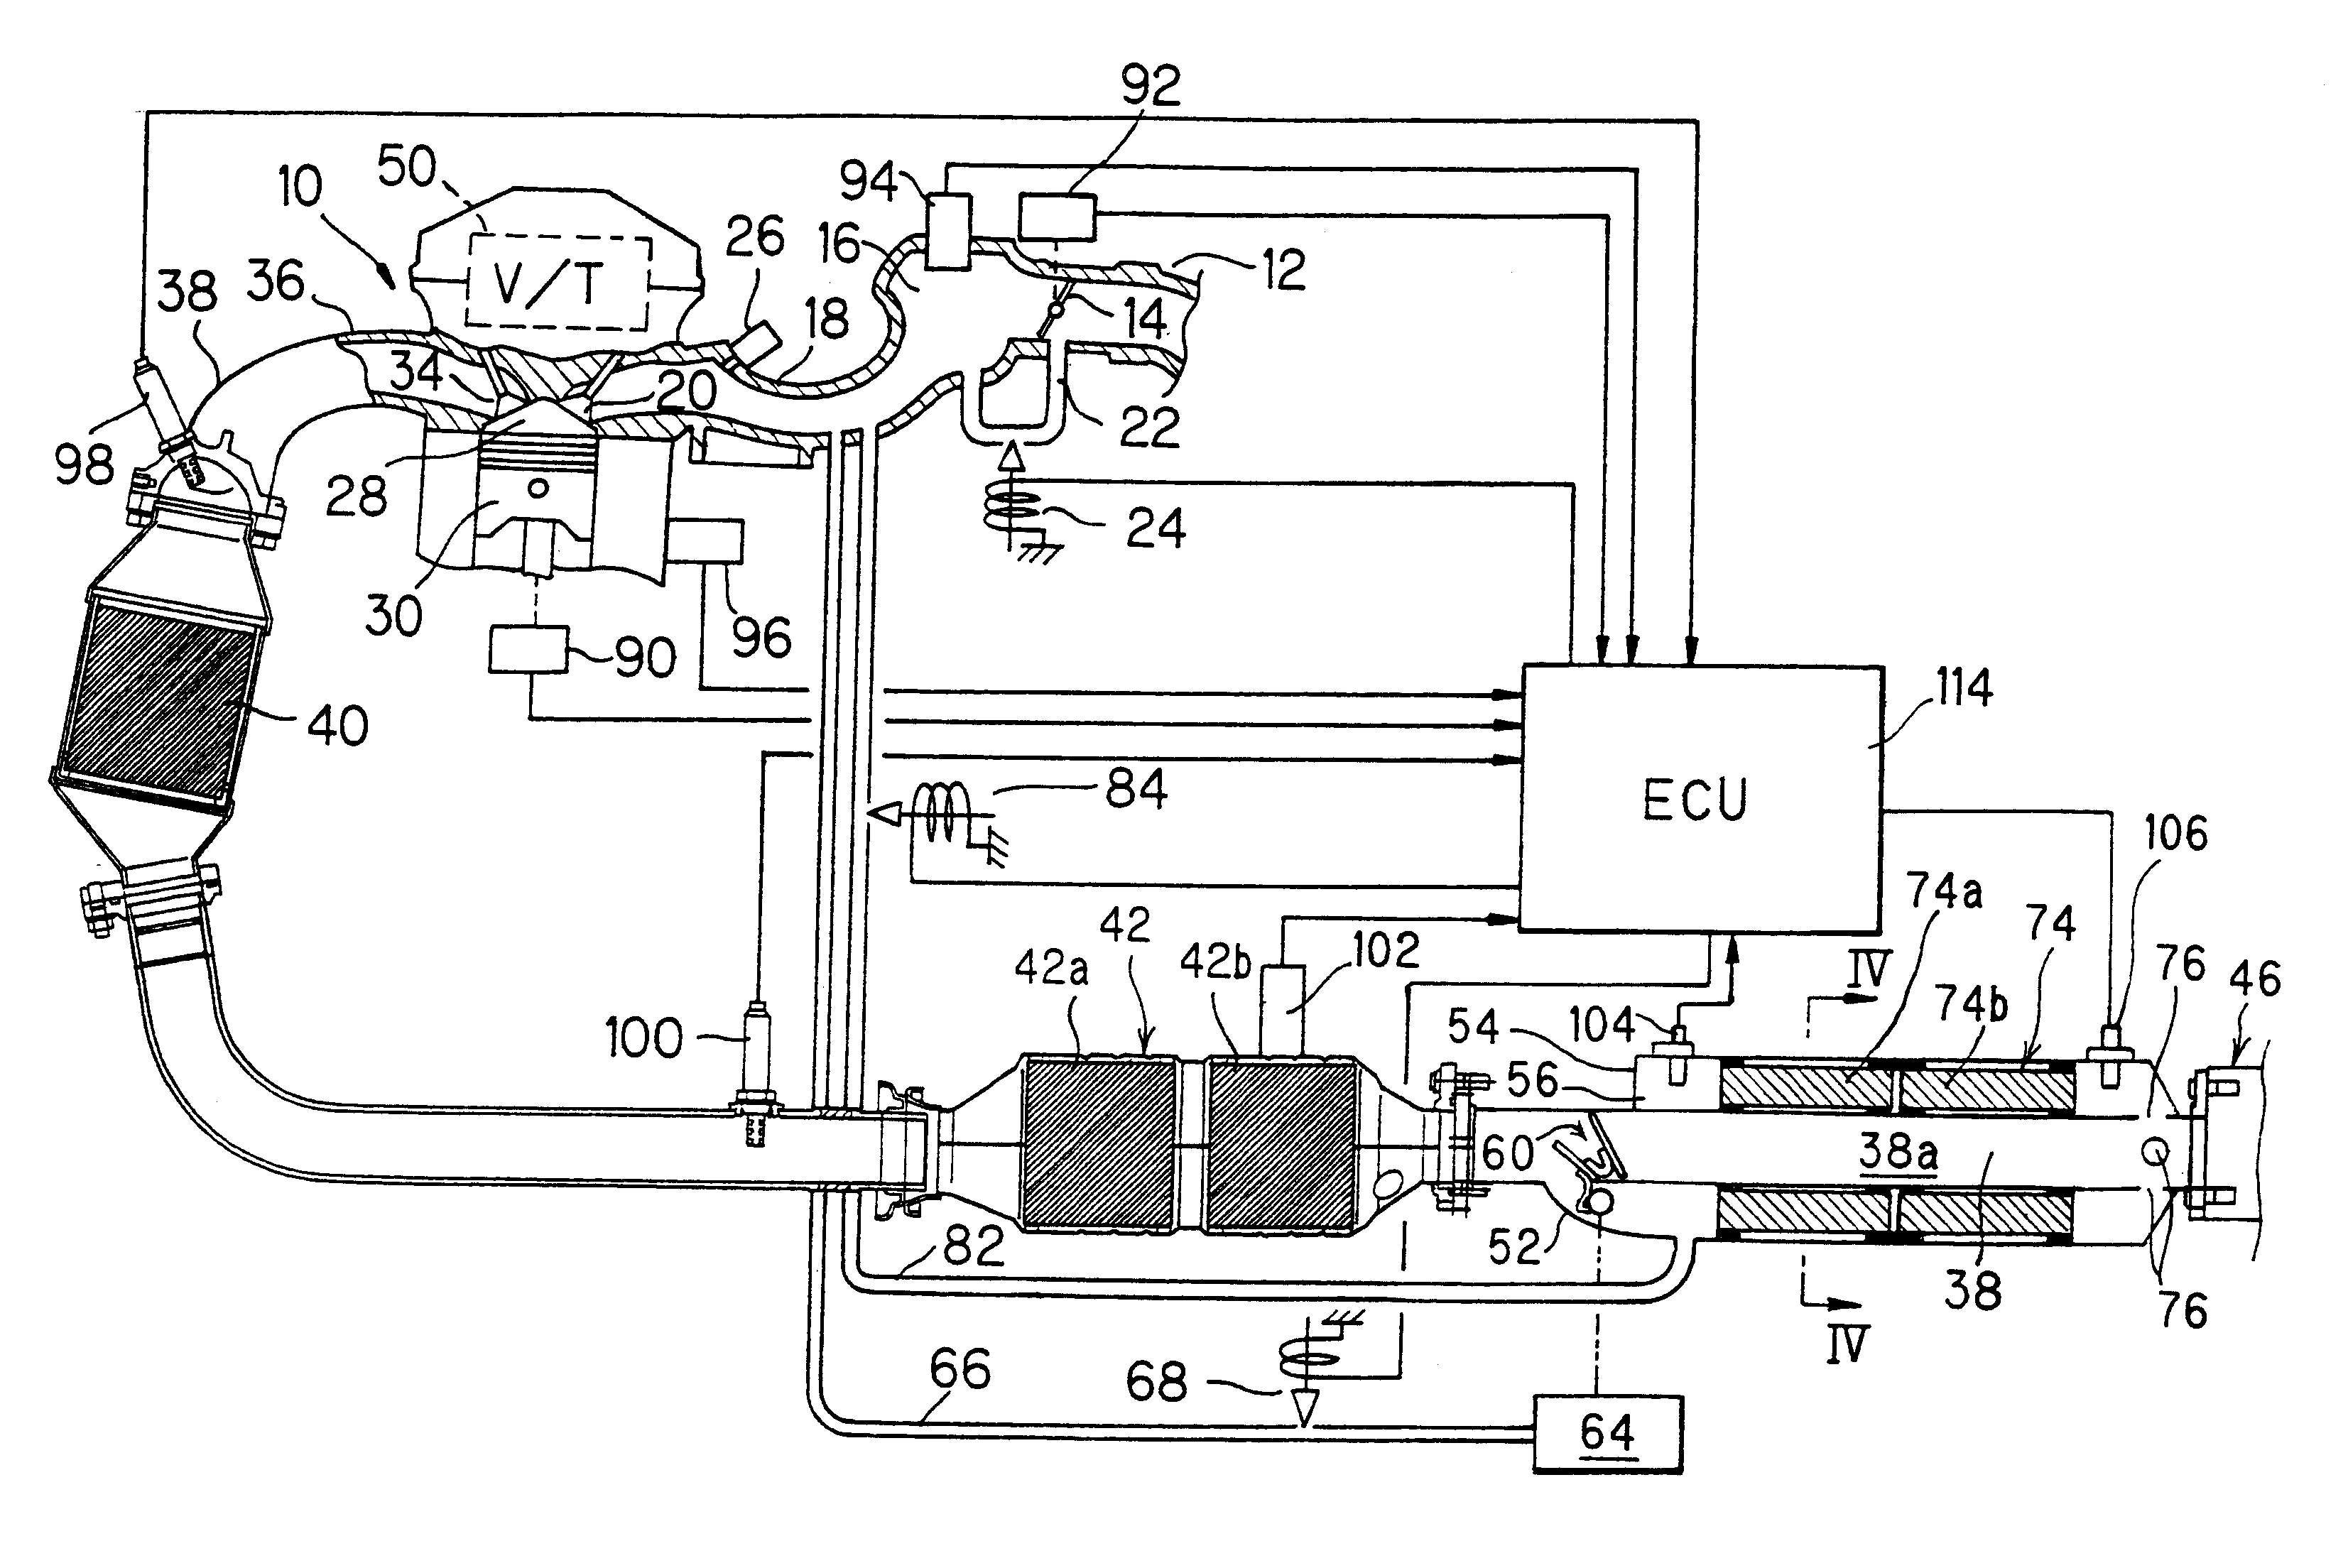 Exhaust switch-over valve malfunction detection system of internal combustion engine